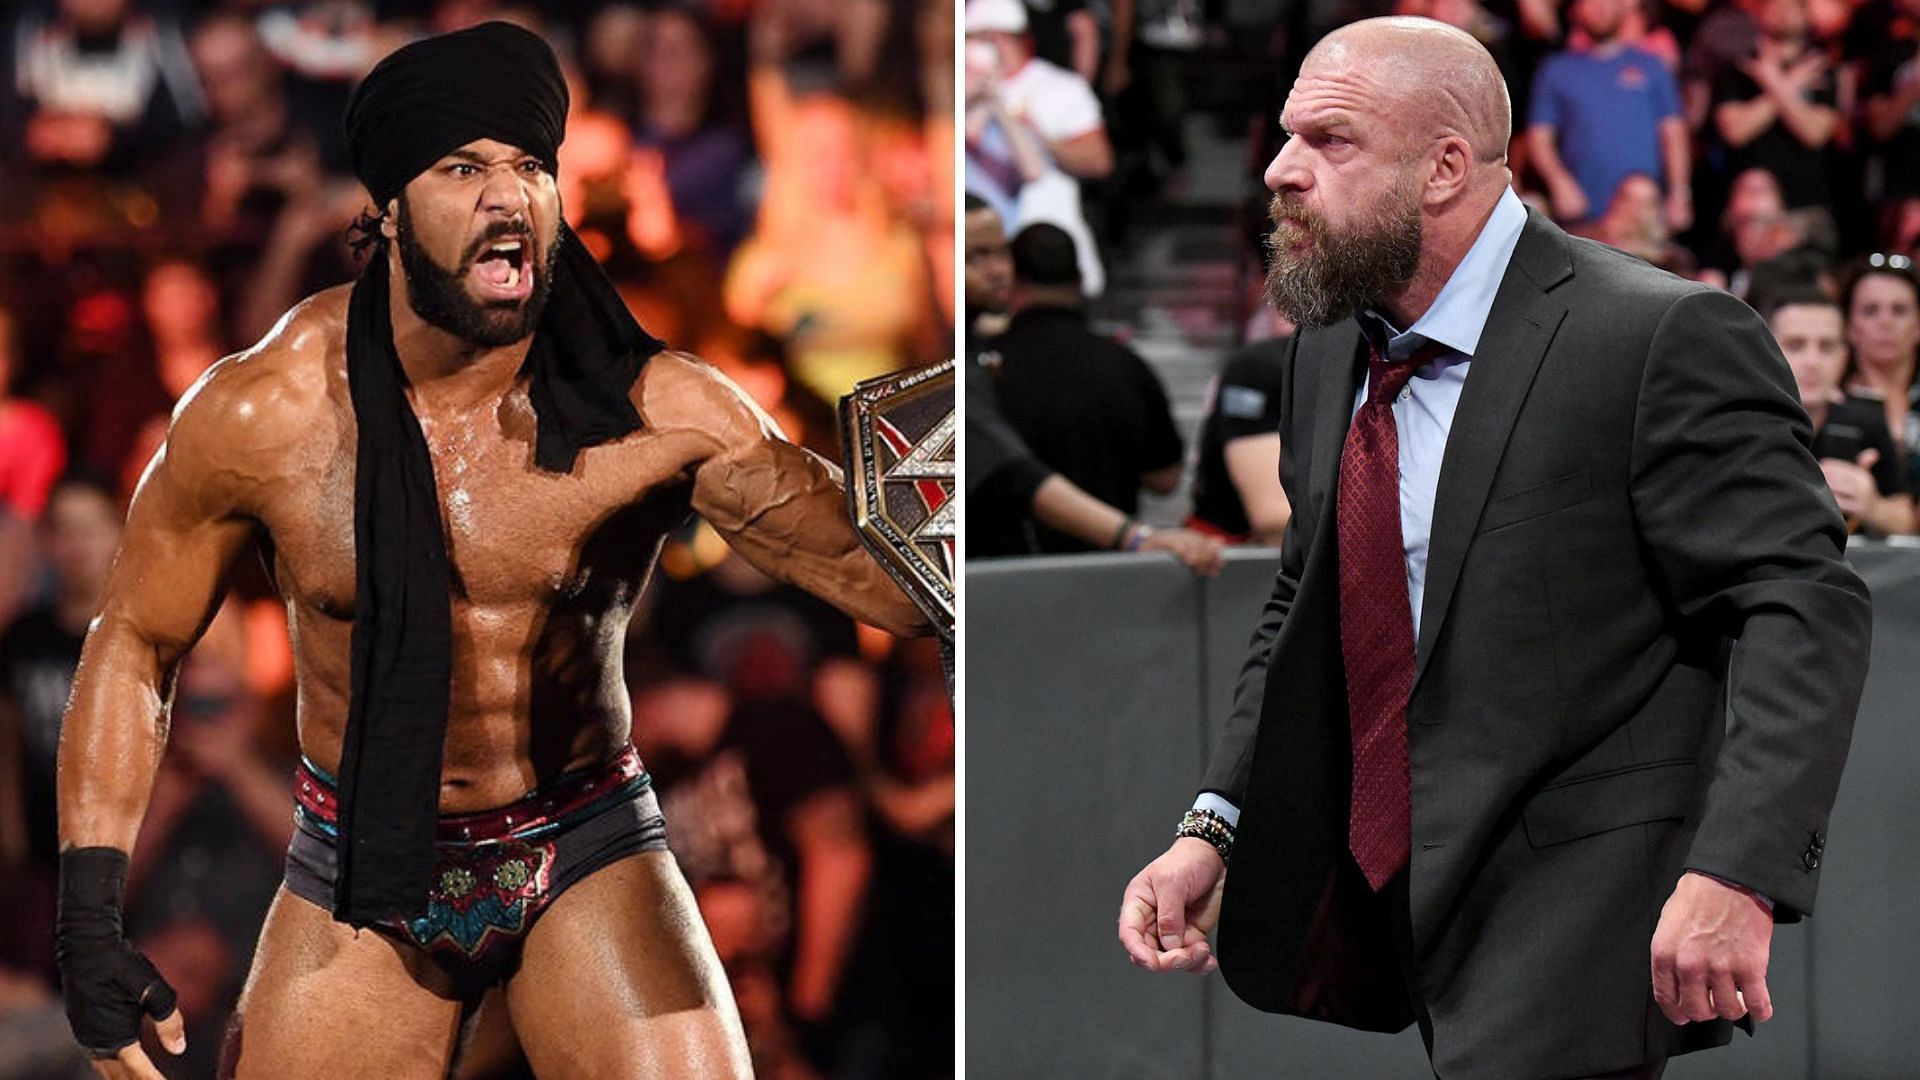 Jinder Mahal has a big request to make of Triple H